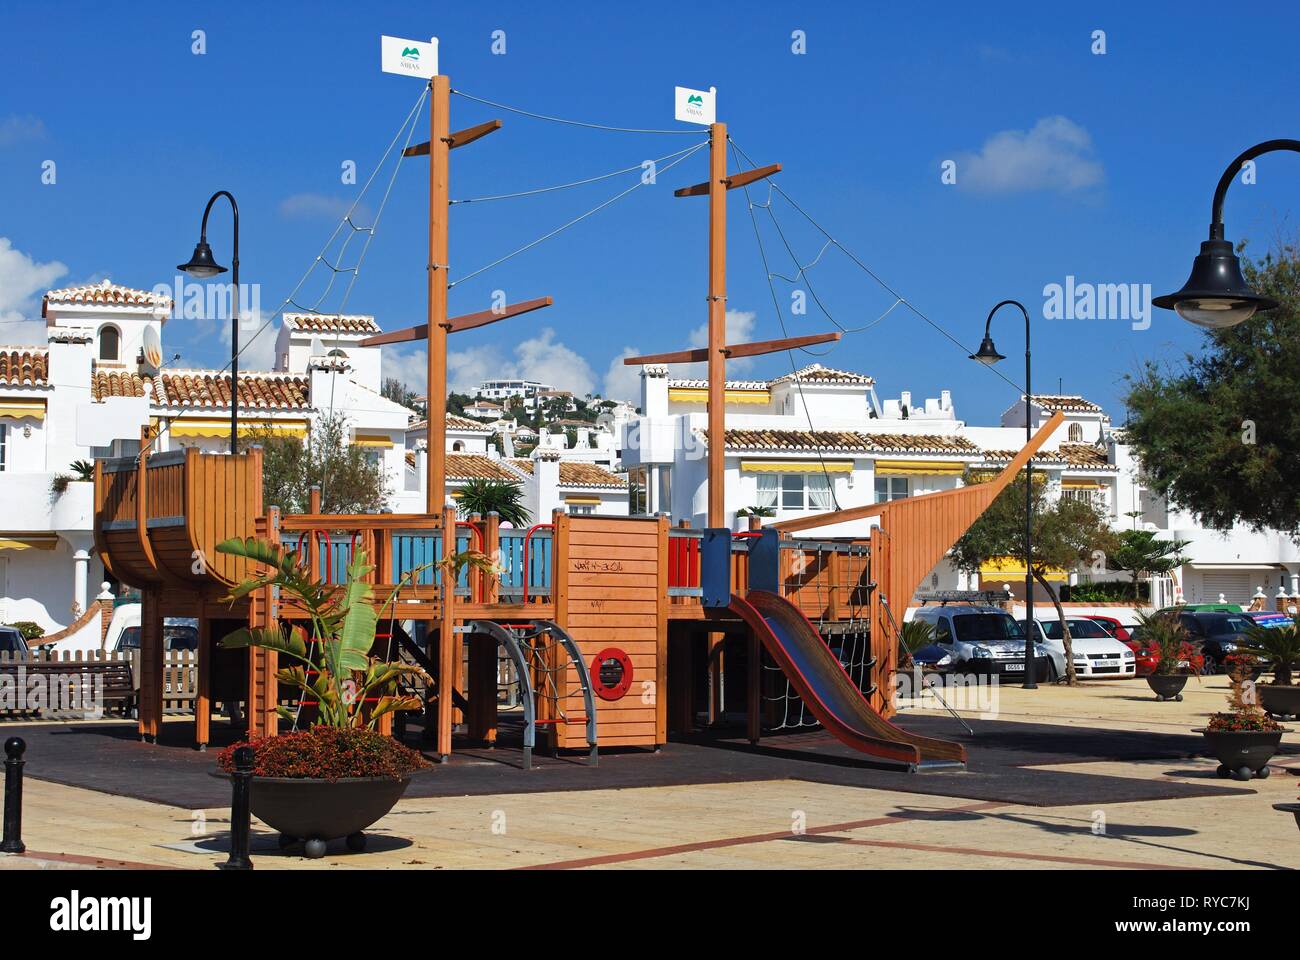 Pirate ship with a slide in the childrens playground along the Paseo Maritimo, La Cala de Mijas, Malaga Province, Andalusia, Spain, Western Europe. Stock Photo